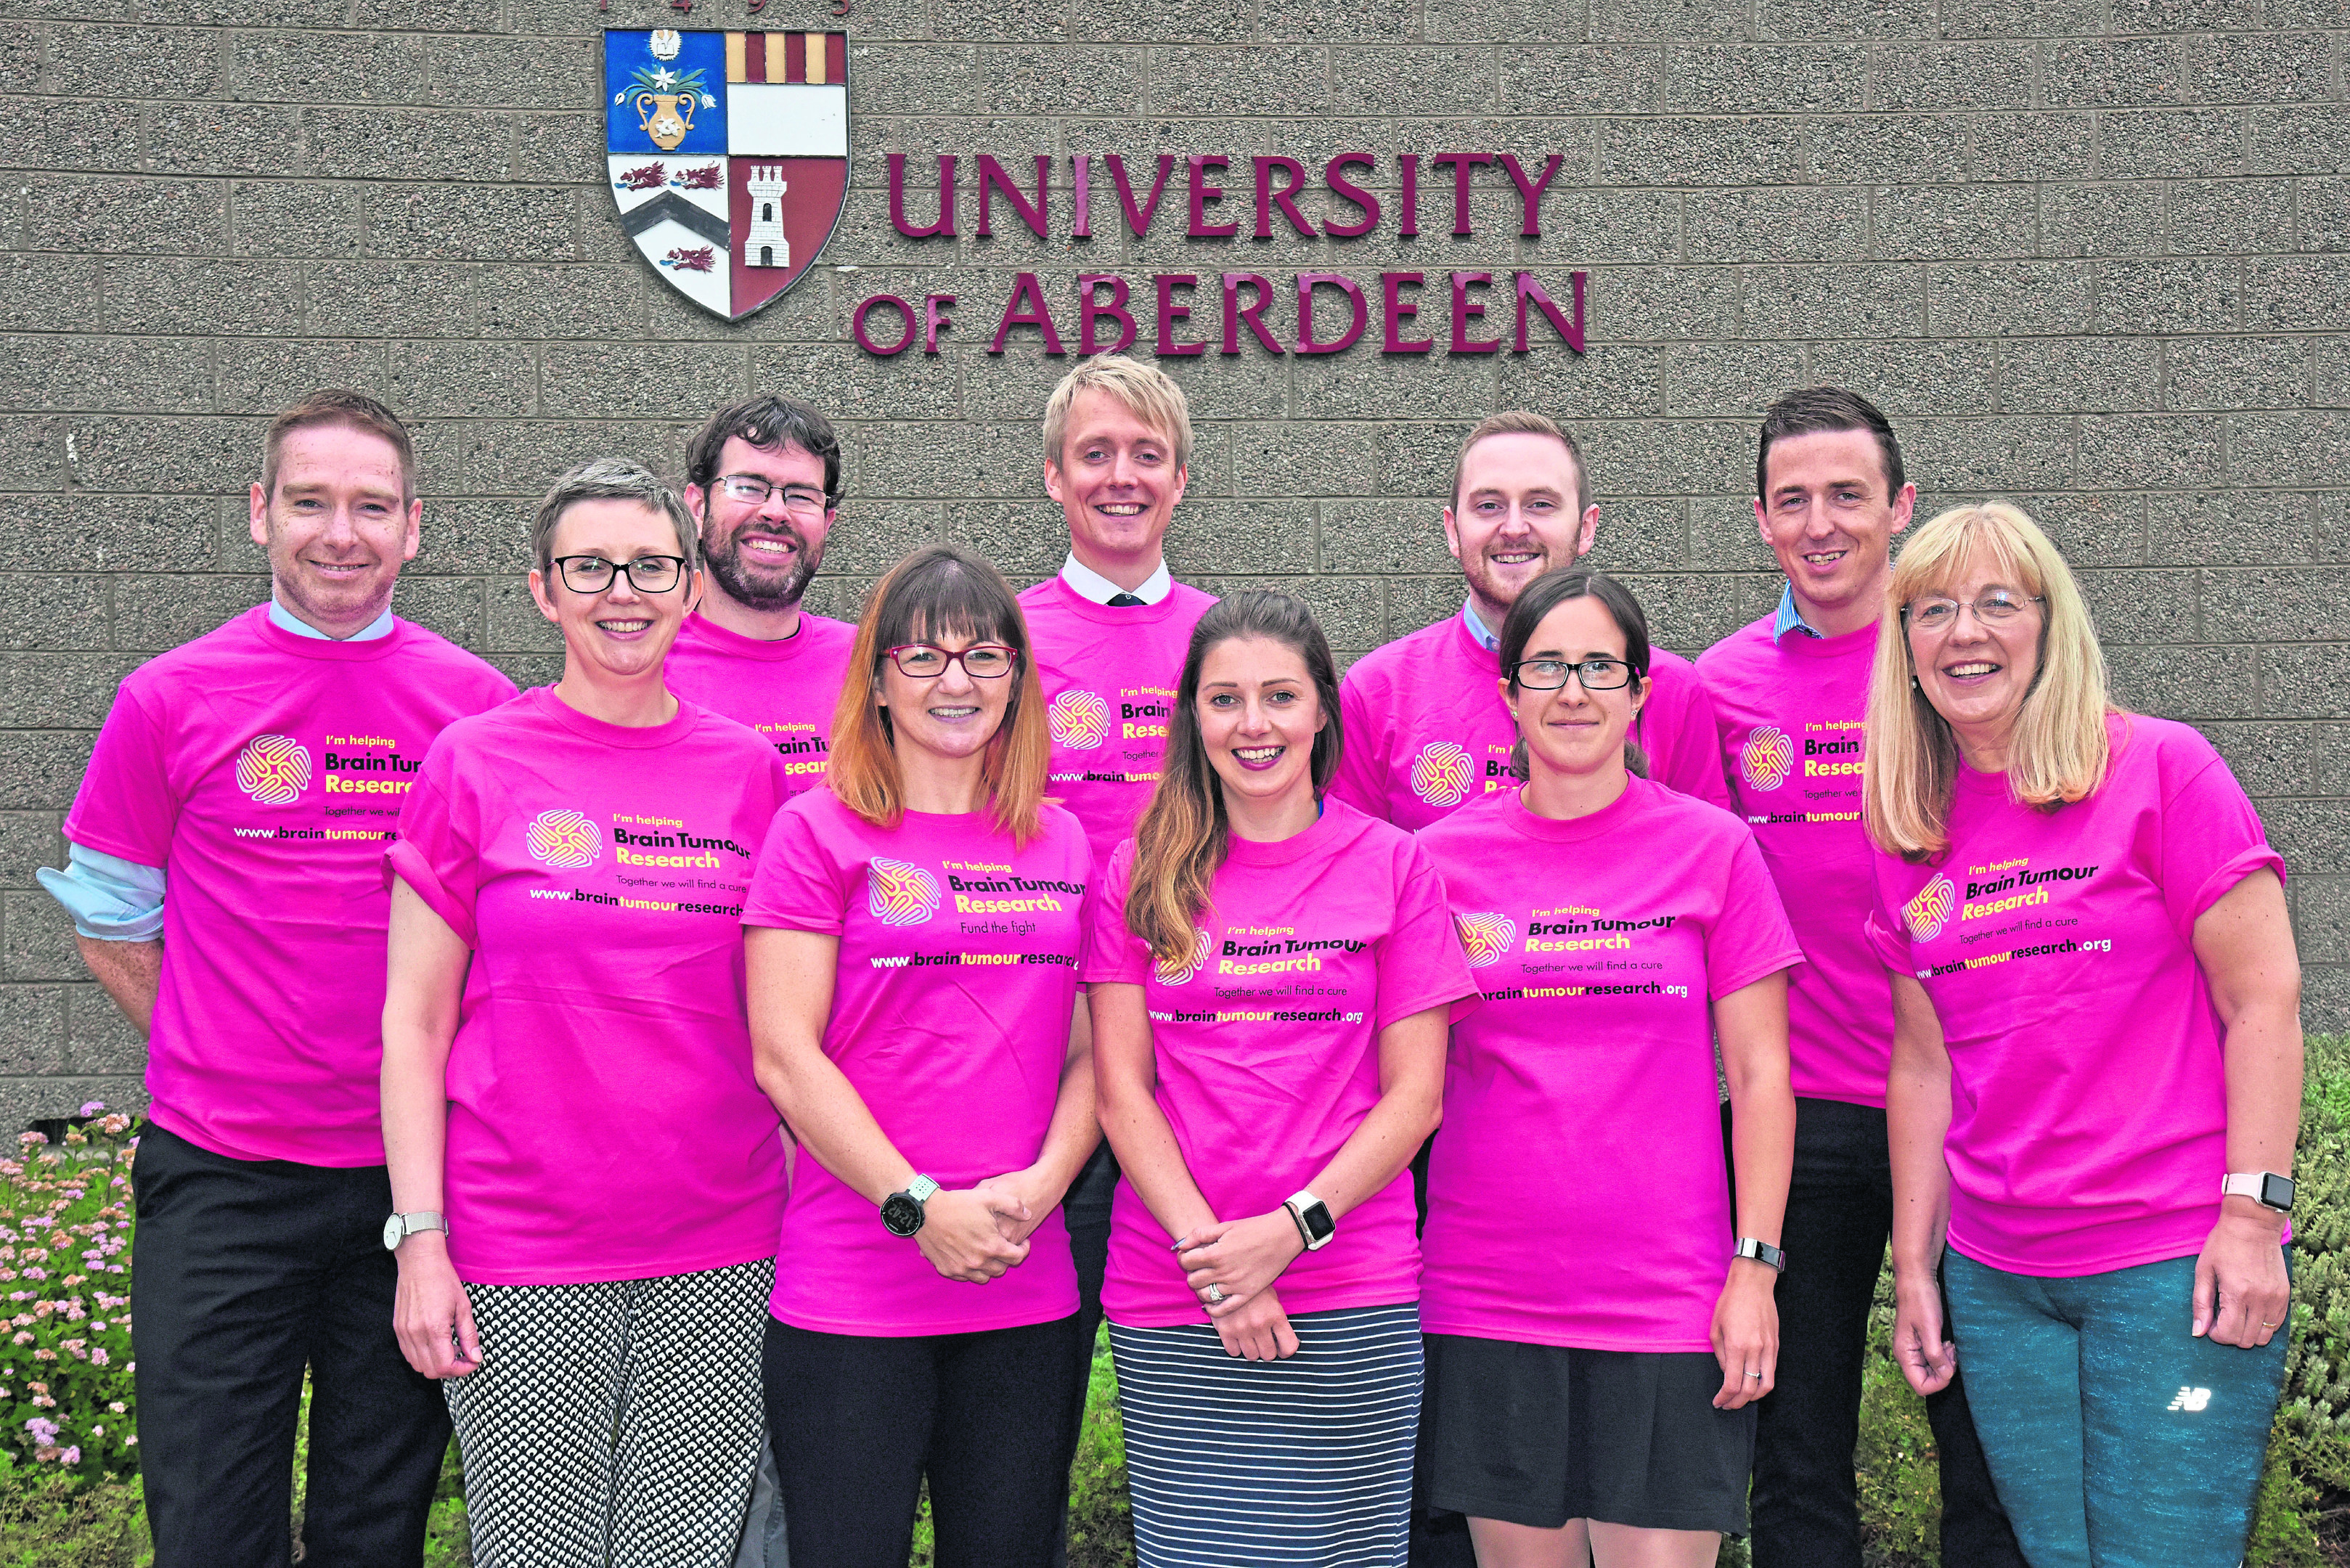 Great Run
The Aberdeen University team who will be running the Great Aberdeen run in memory of Sue Richardson.